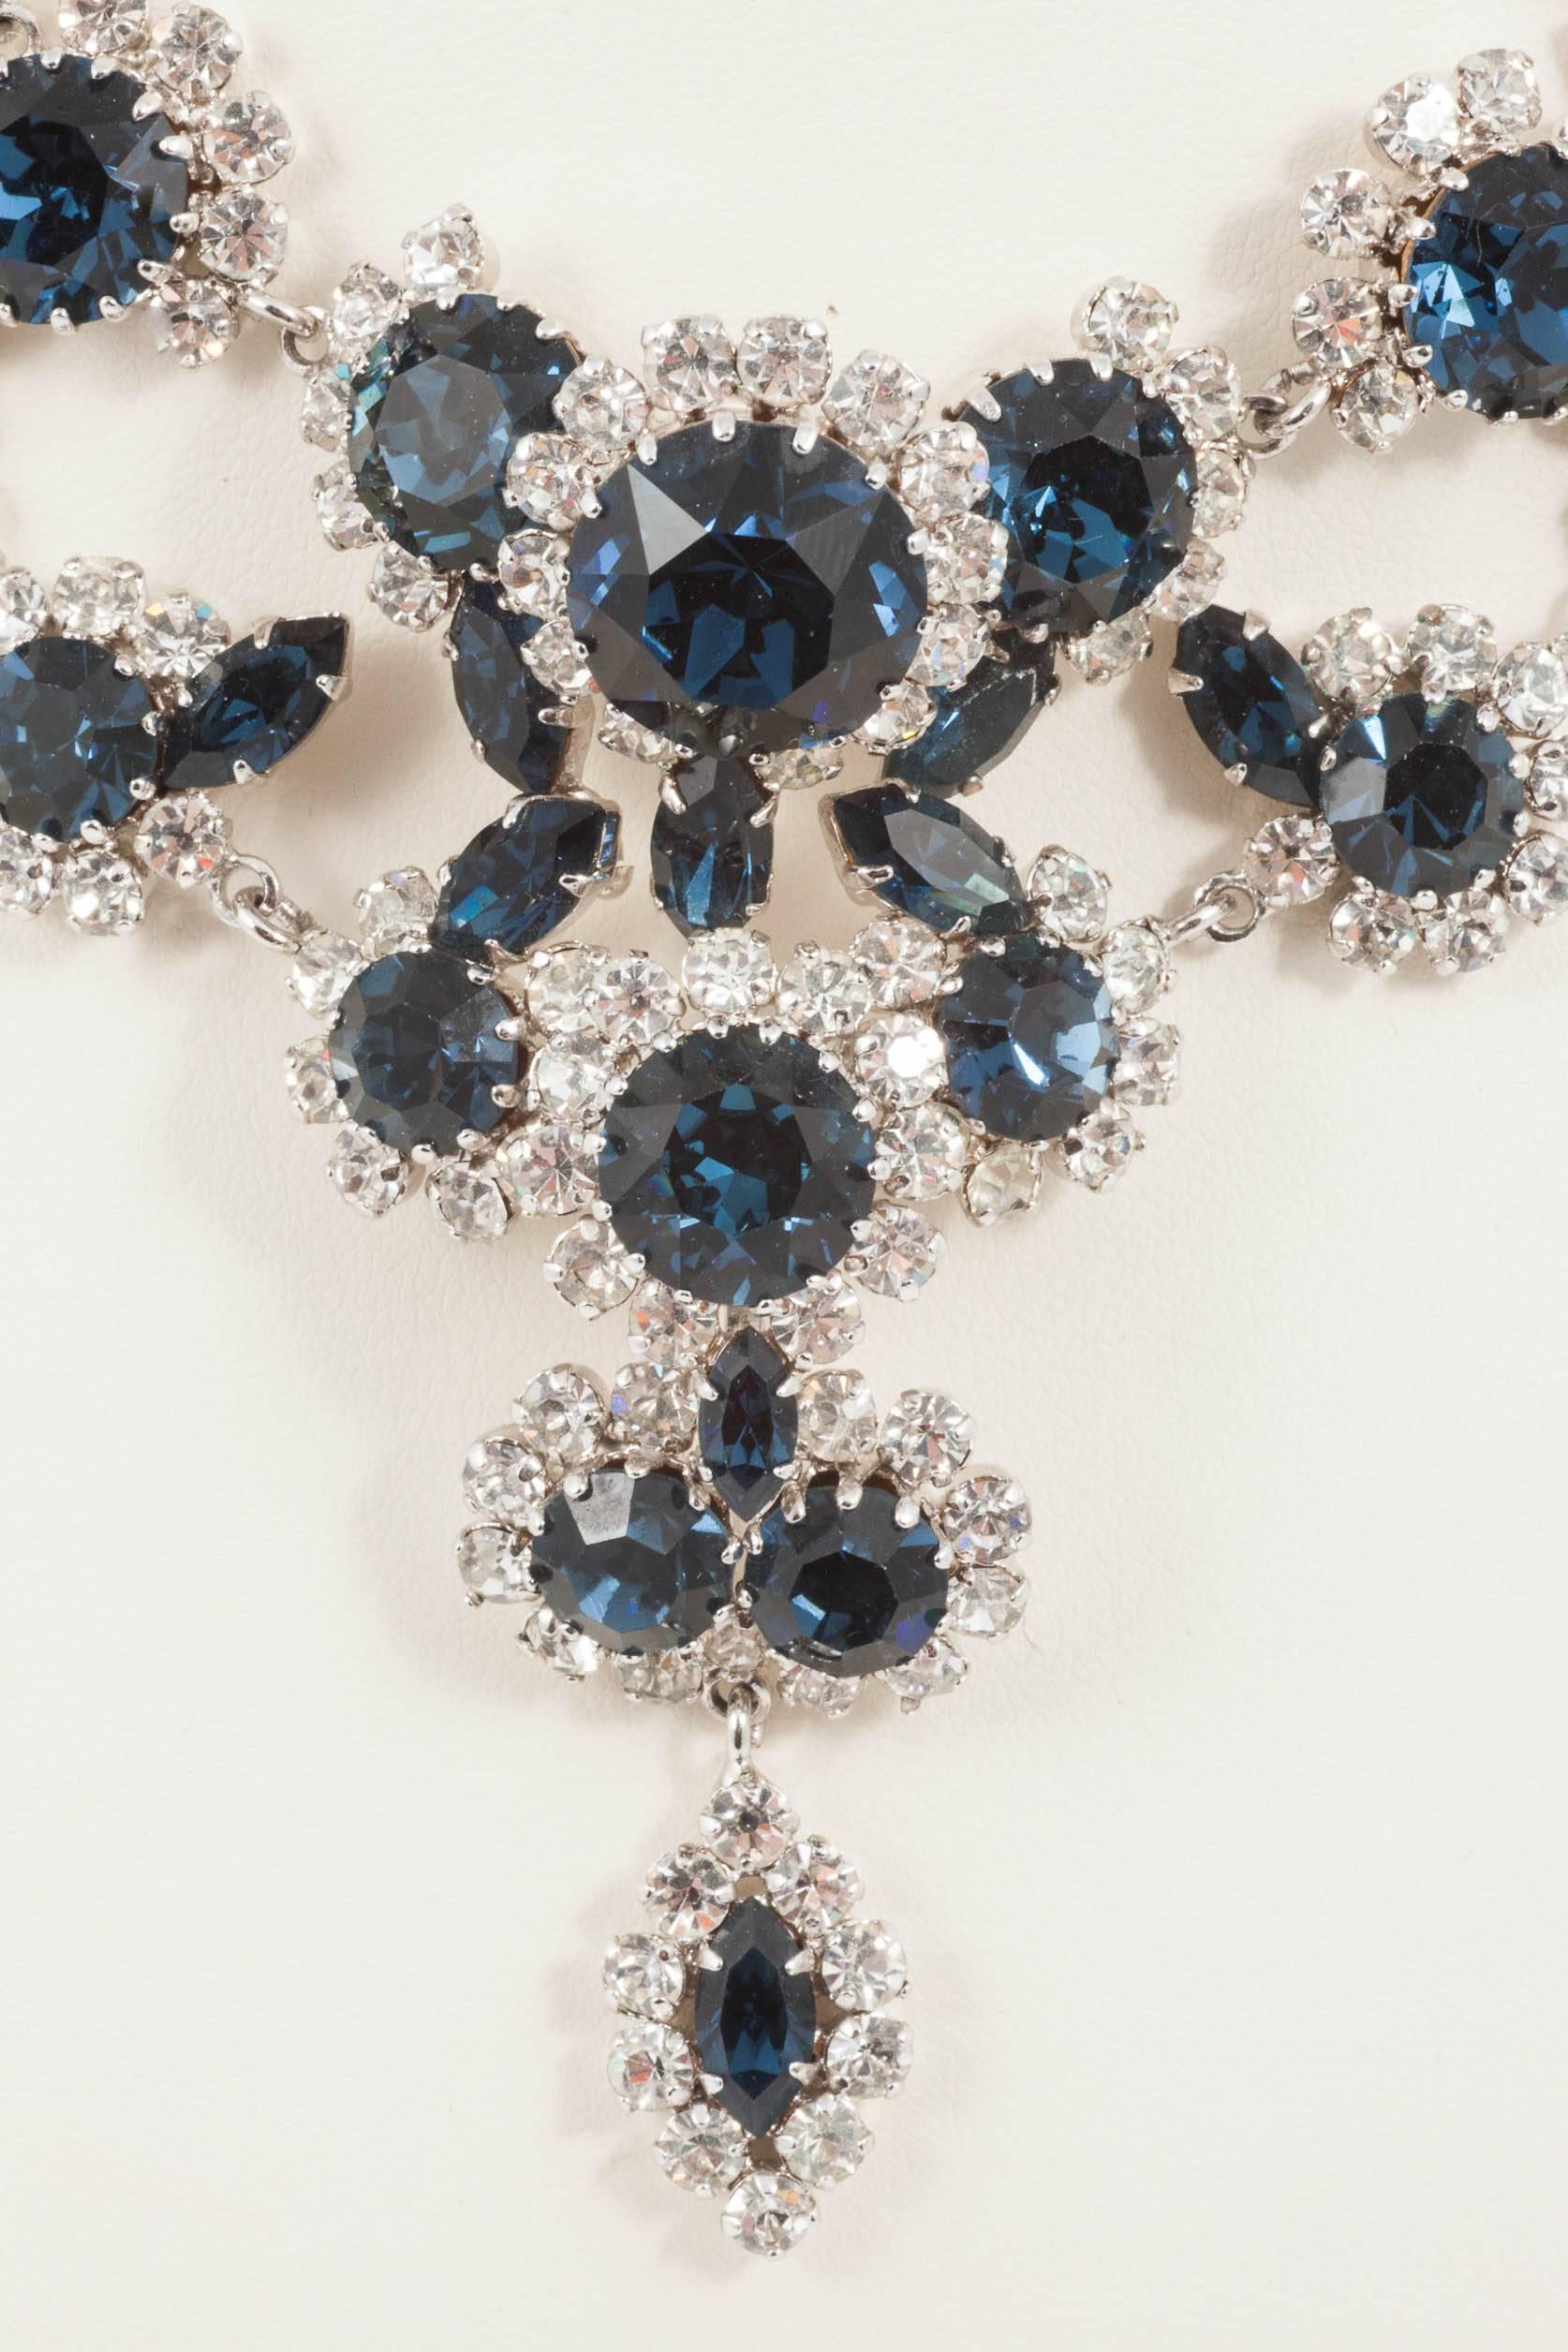 This striking articulated necklace, in sapphire and clear pastes, from the 1960s, is made from the finest Austrian hand set pastes and is a classic example of the pieces being produced in the country at that time. Attributed to Christian Dior, many